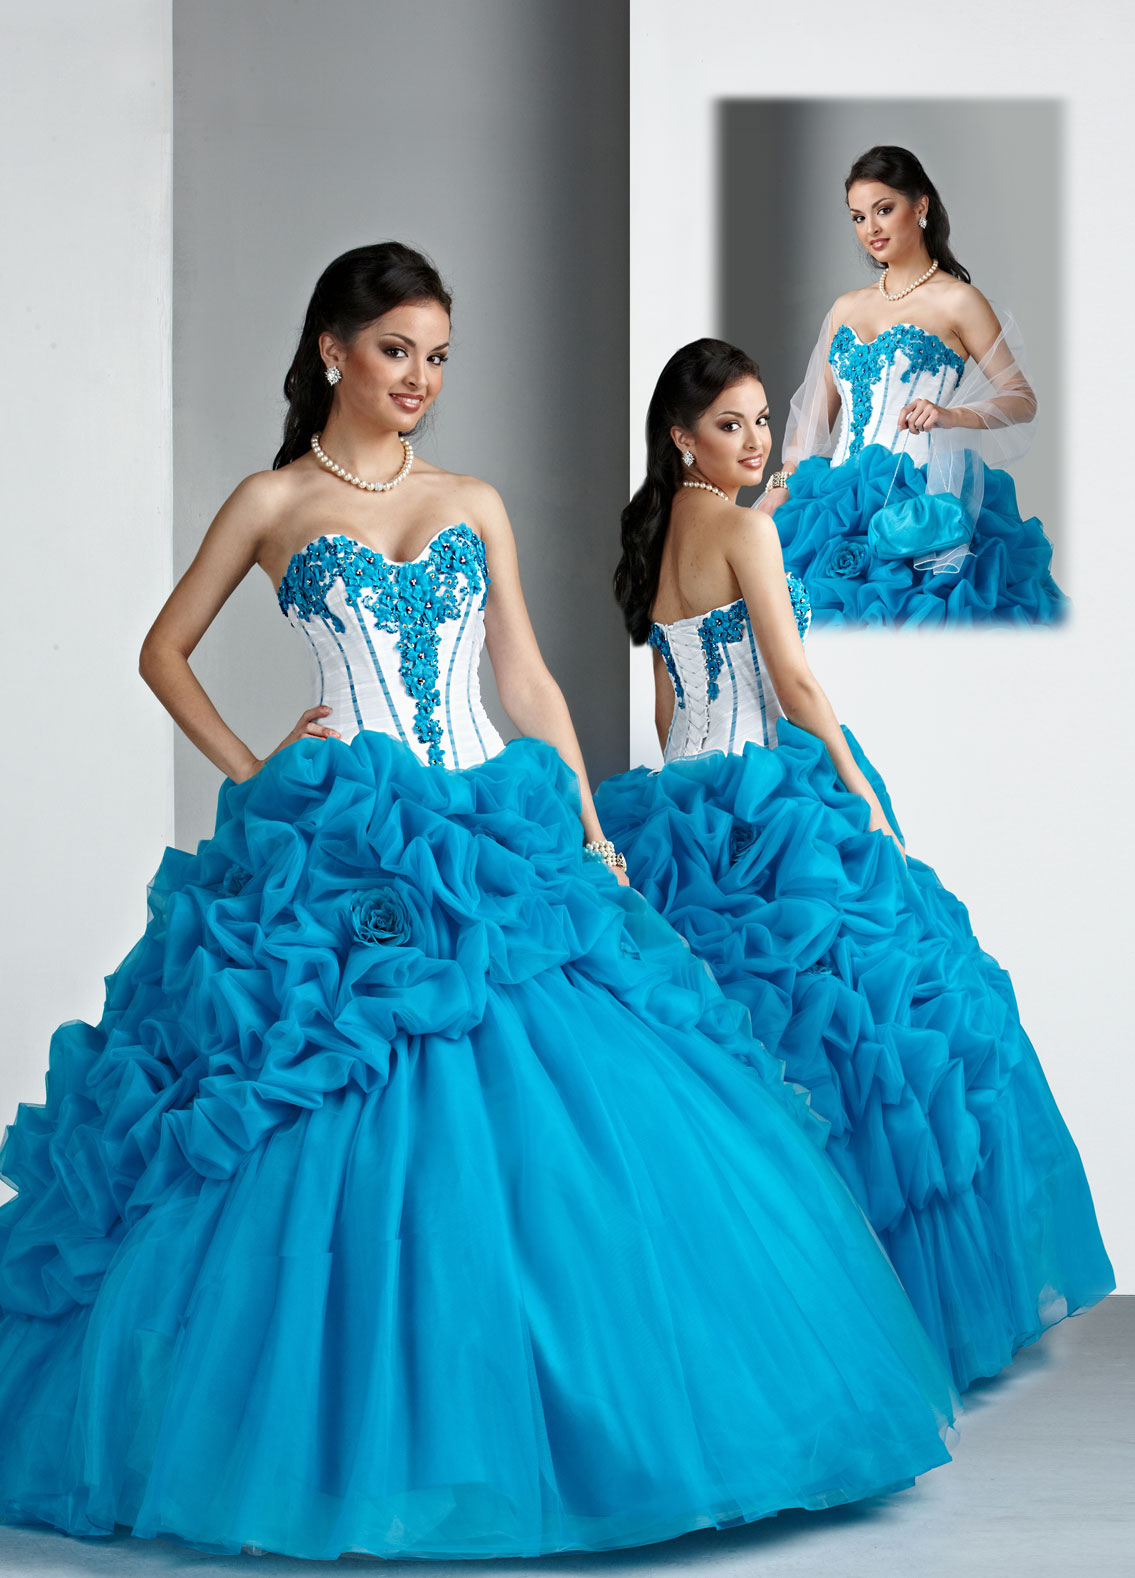 Turquoise And White Strapless Sweetheart Lace Up Floor Length Ball Gown Quinceanera Dresses With Appliques And Ruffles 